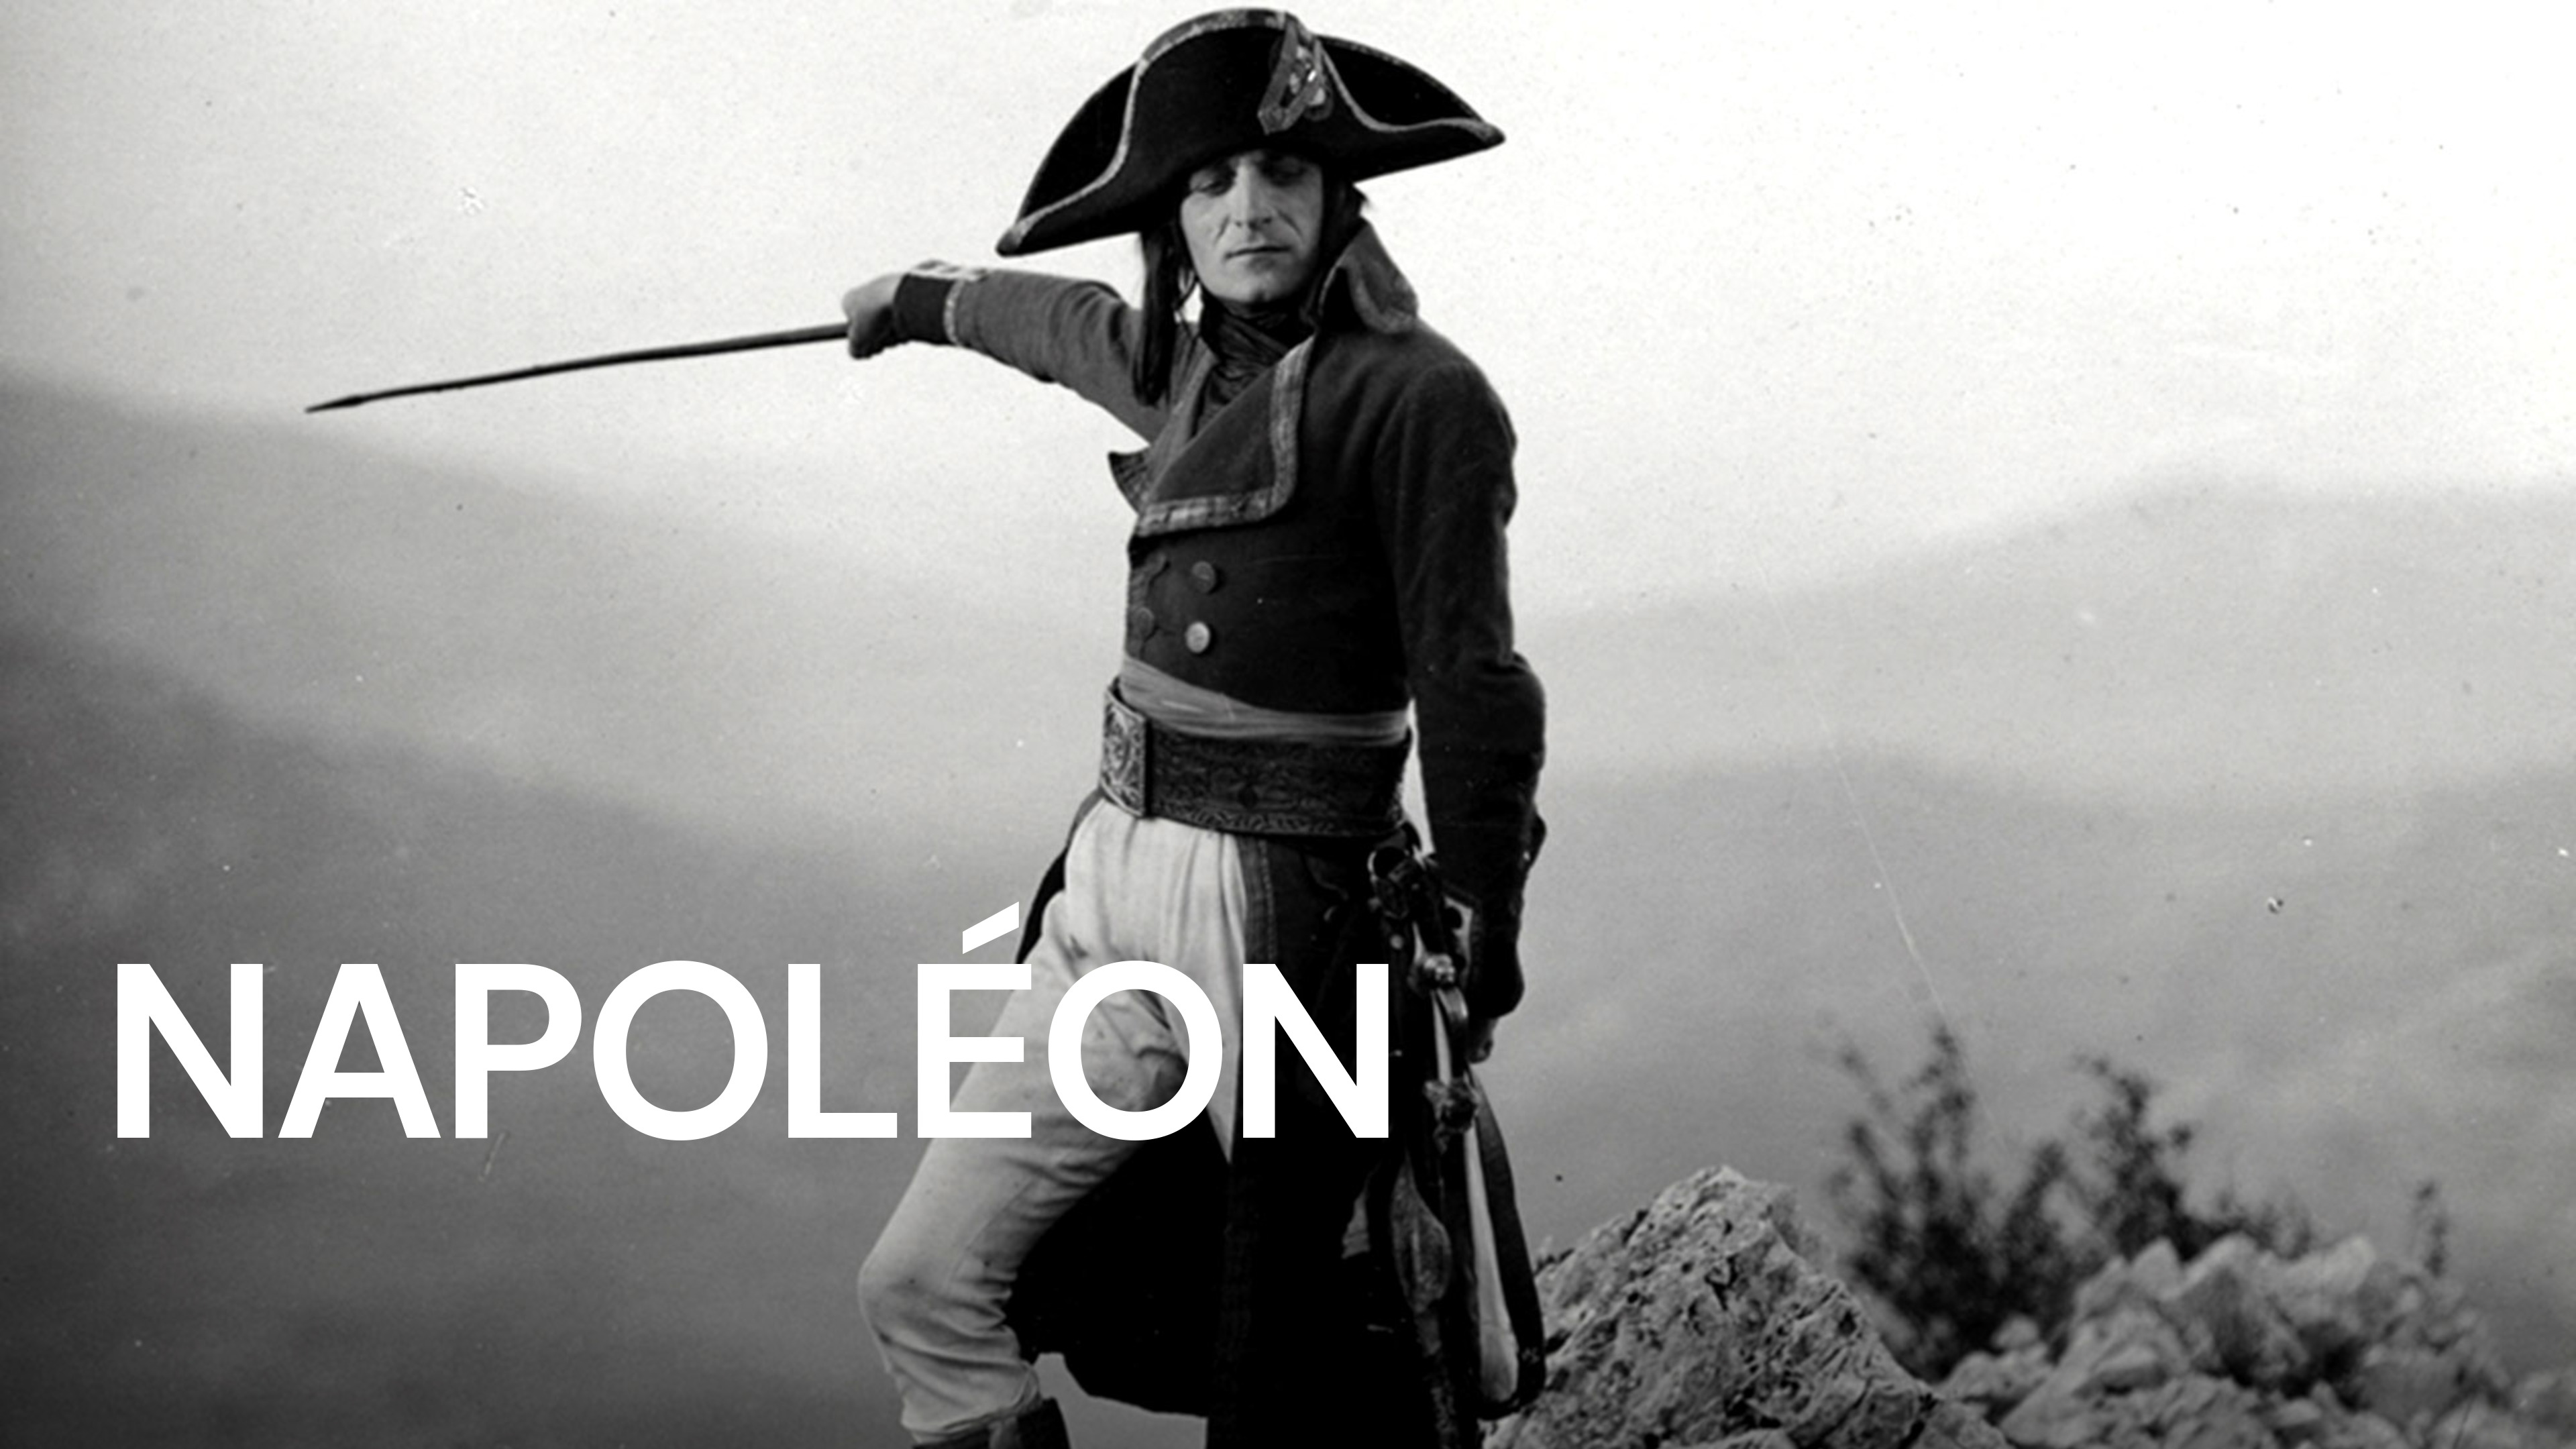 46-facts-about-the-movie-napoleon